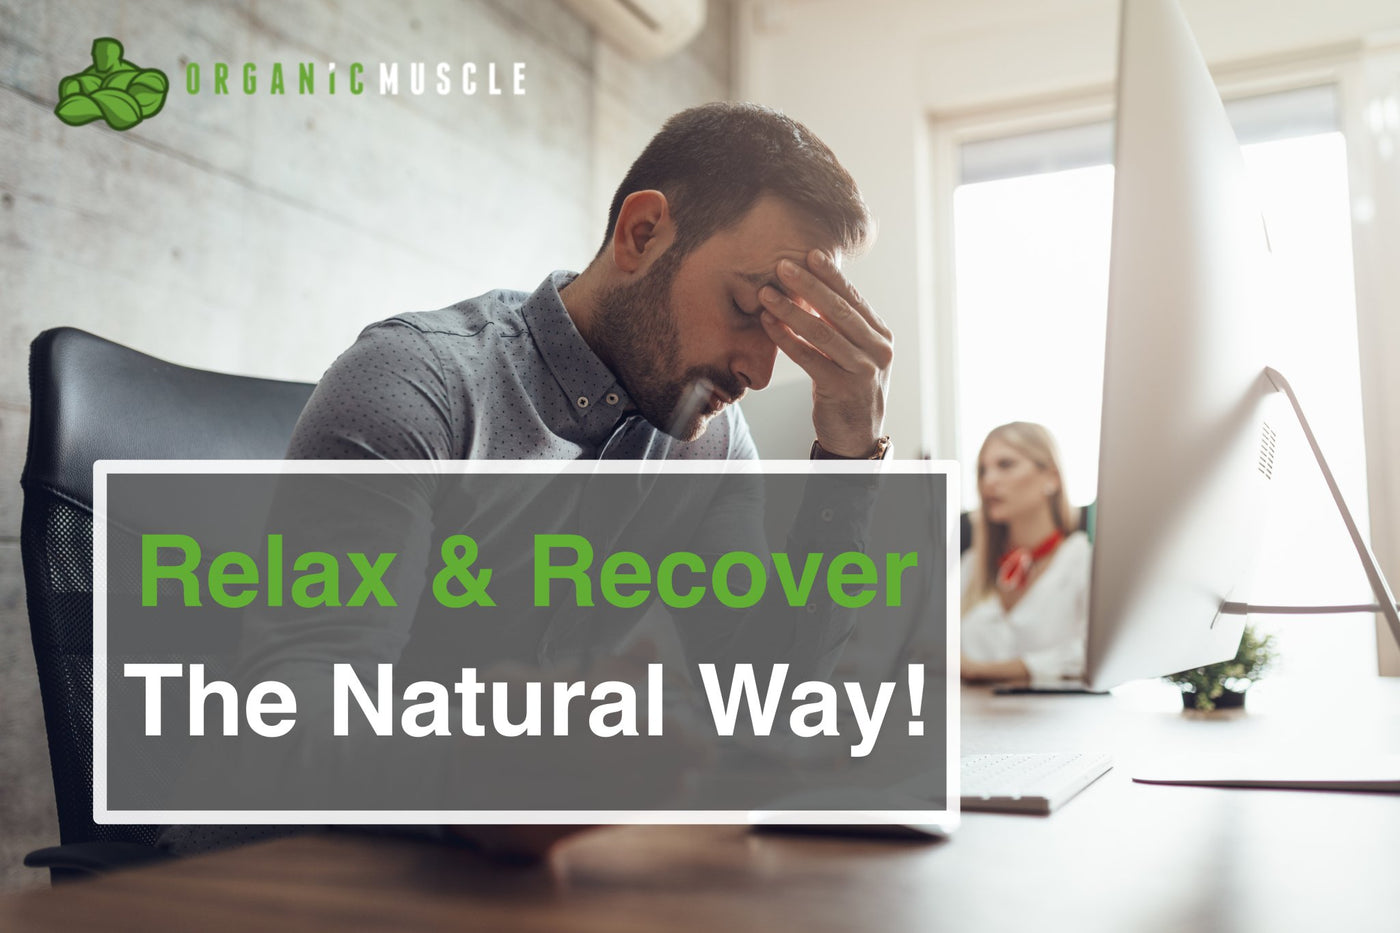 Relax & Recover The Natural Way - Organic Muscle Fitness Supplements